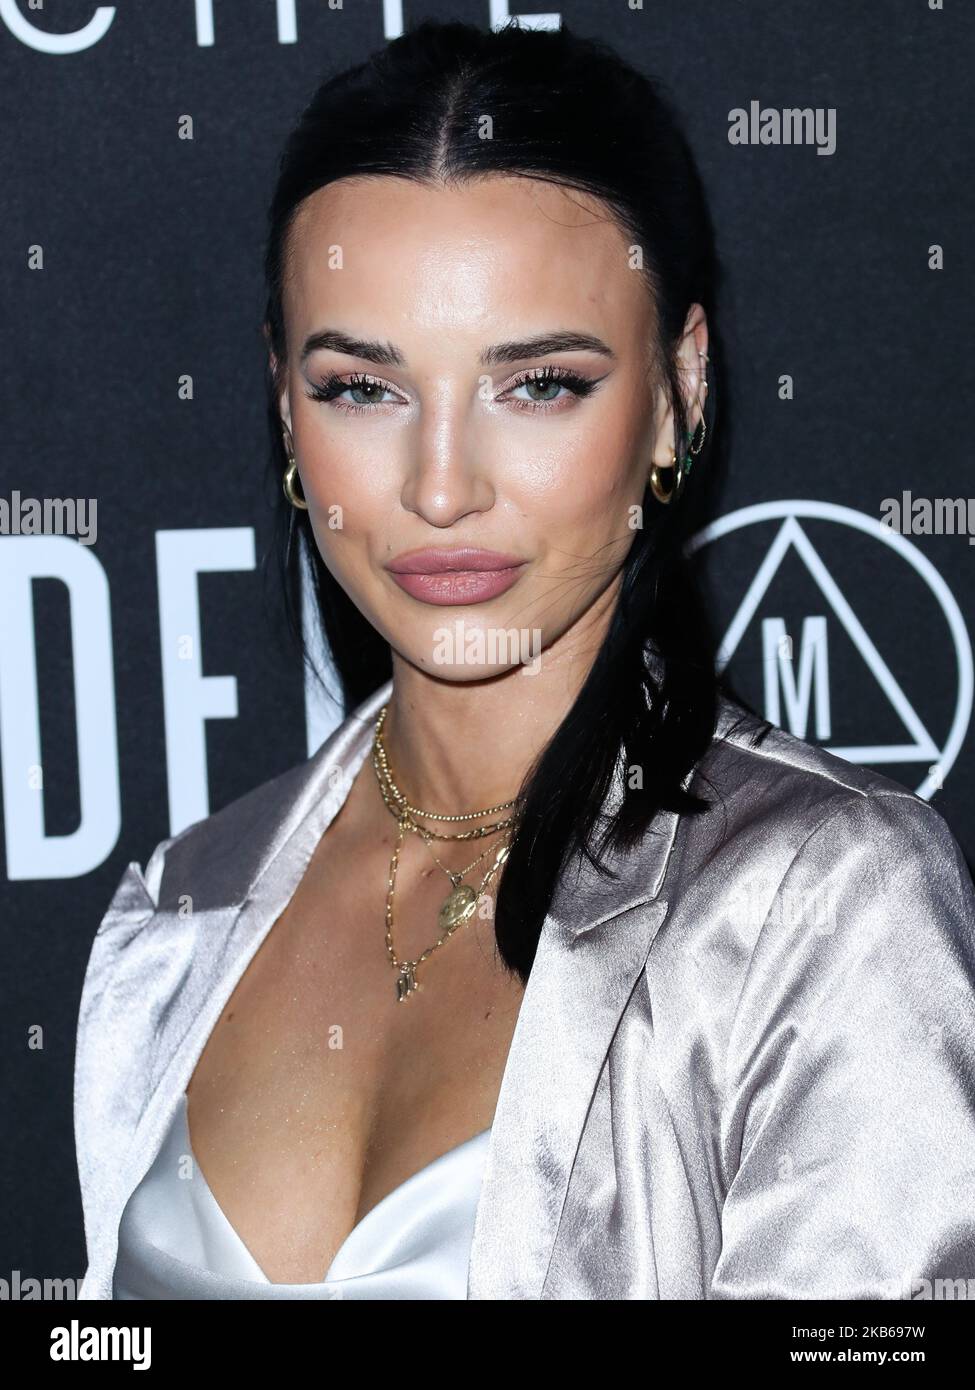 WEST HOLLYWOOD, LOS ANGELES, CALIFORNIA, USA - SEPTEMBER 18: Genelle Seldon arrives at the Sofia Richie x Missguided Launch Party held at Bootsy Bellows on September 18, 2019 in West Hollywood, Los Angeles, California, United States. (Photo by Xavier Collin/Image Press Agency/NurPhoto) Stock Photo